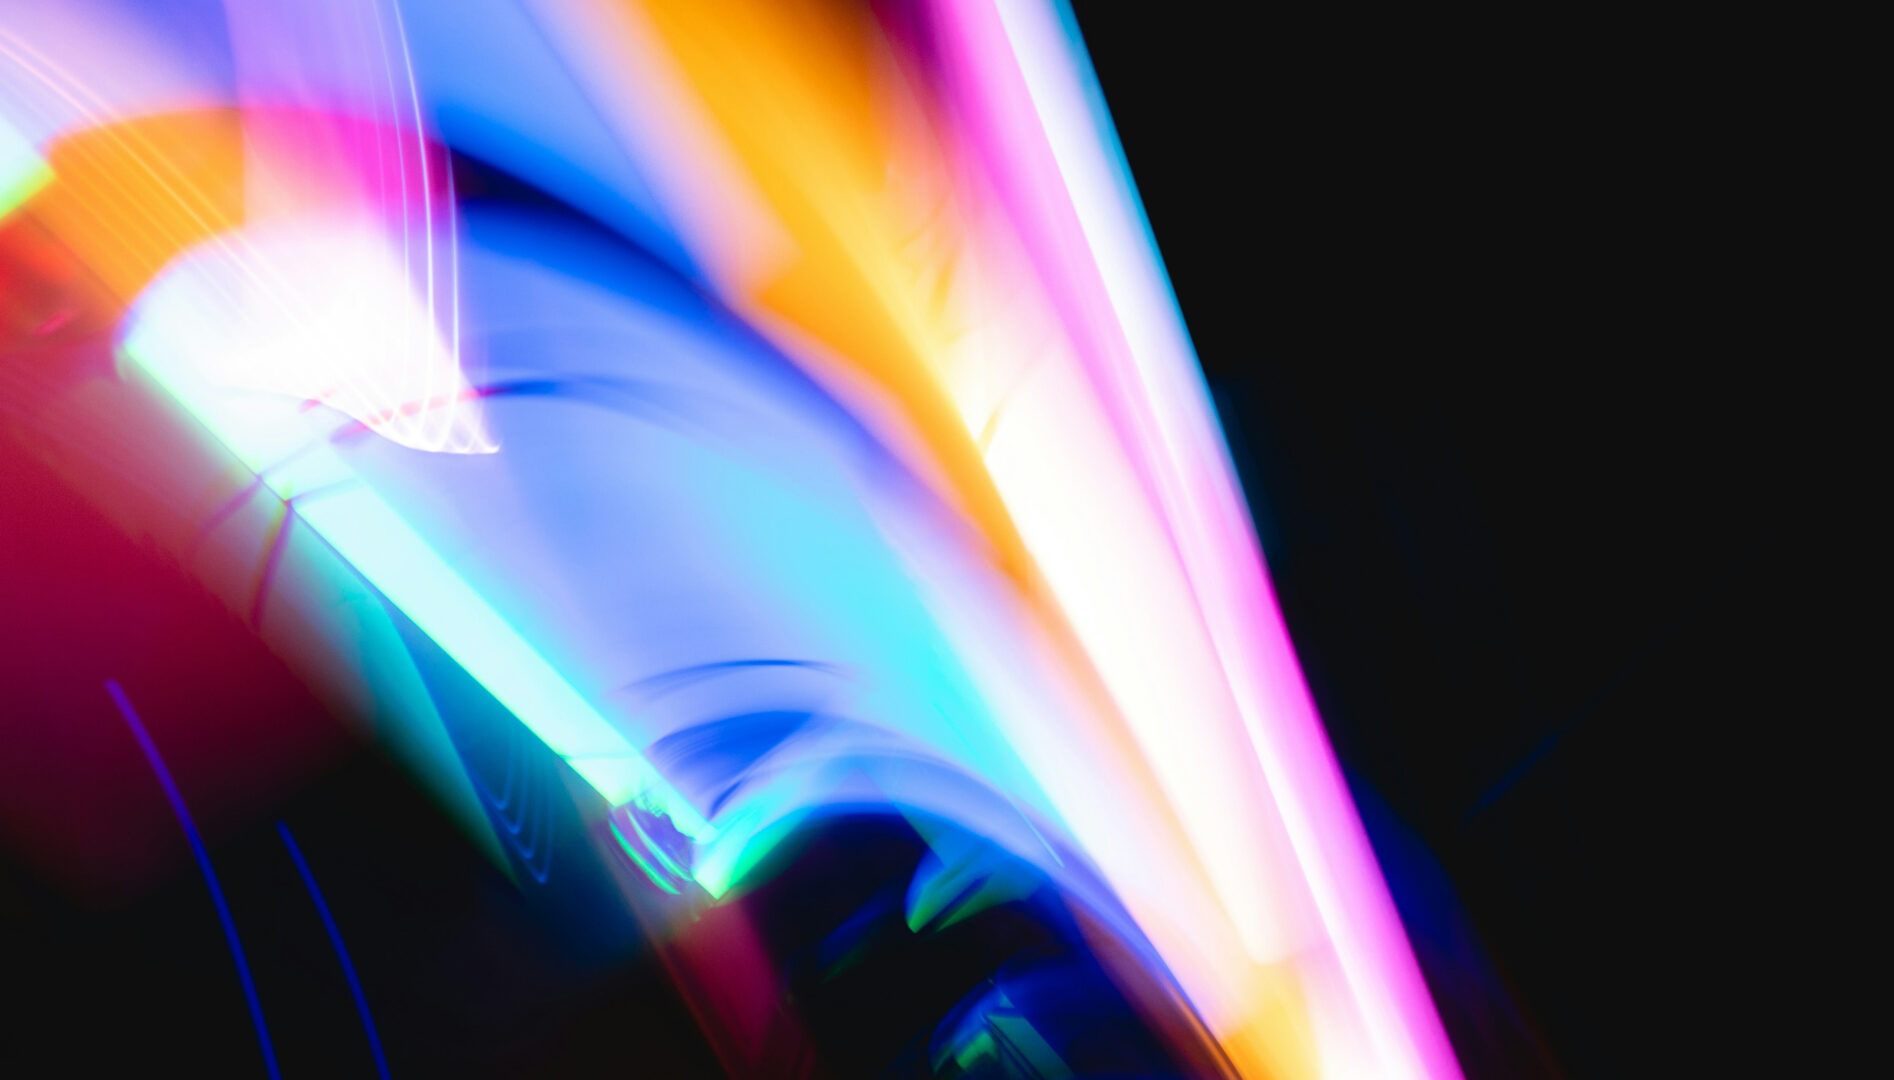 Abstract images of multicolored lights on a black background